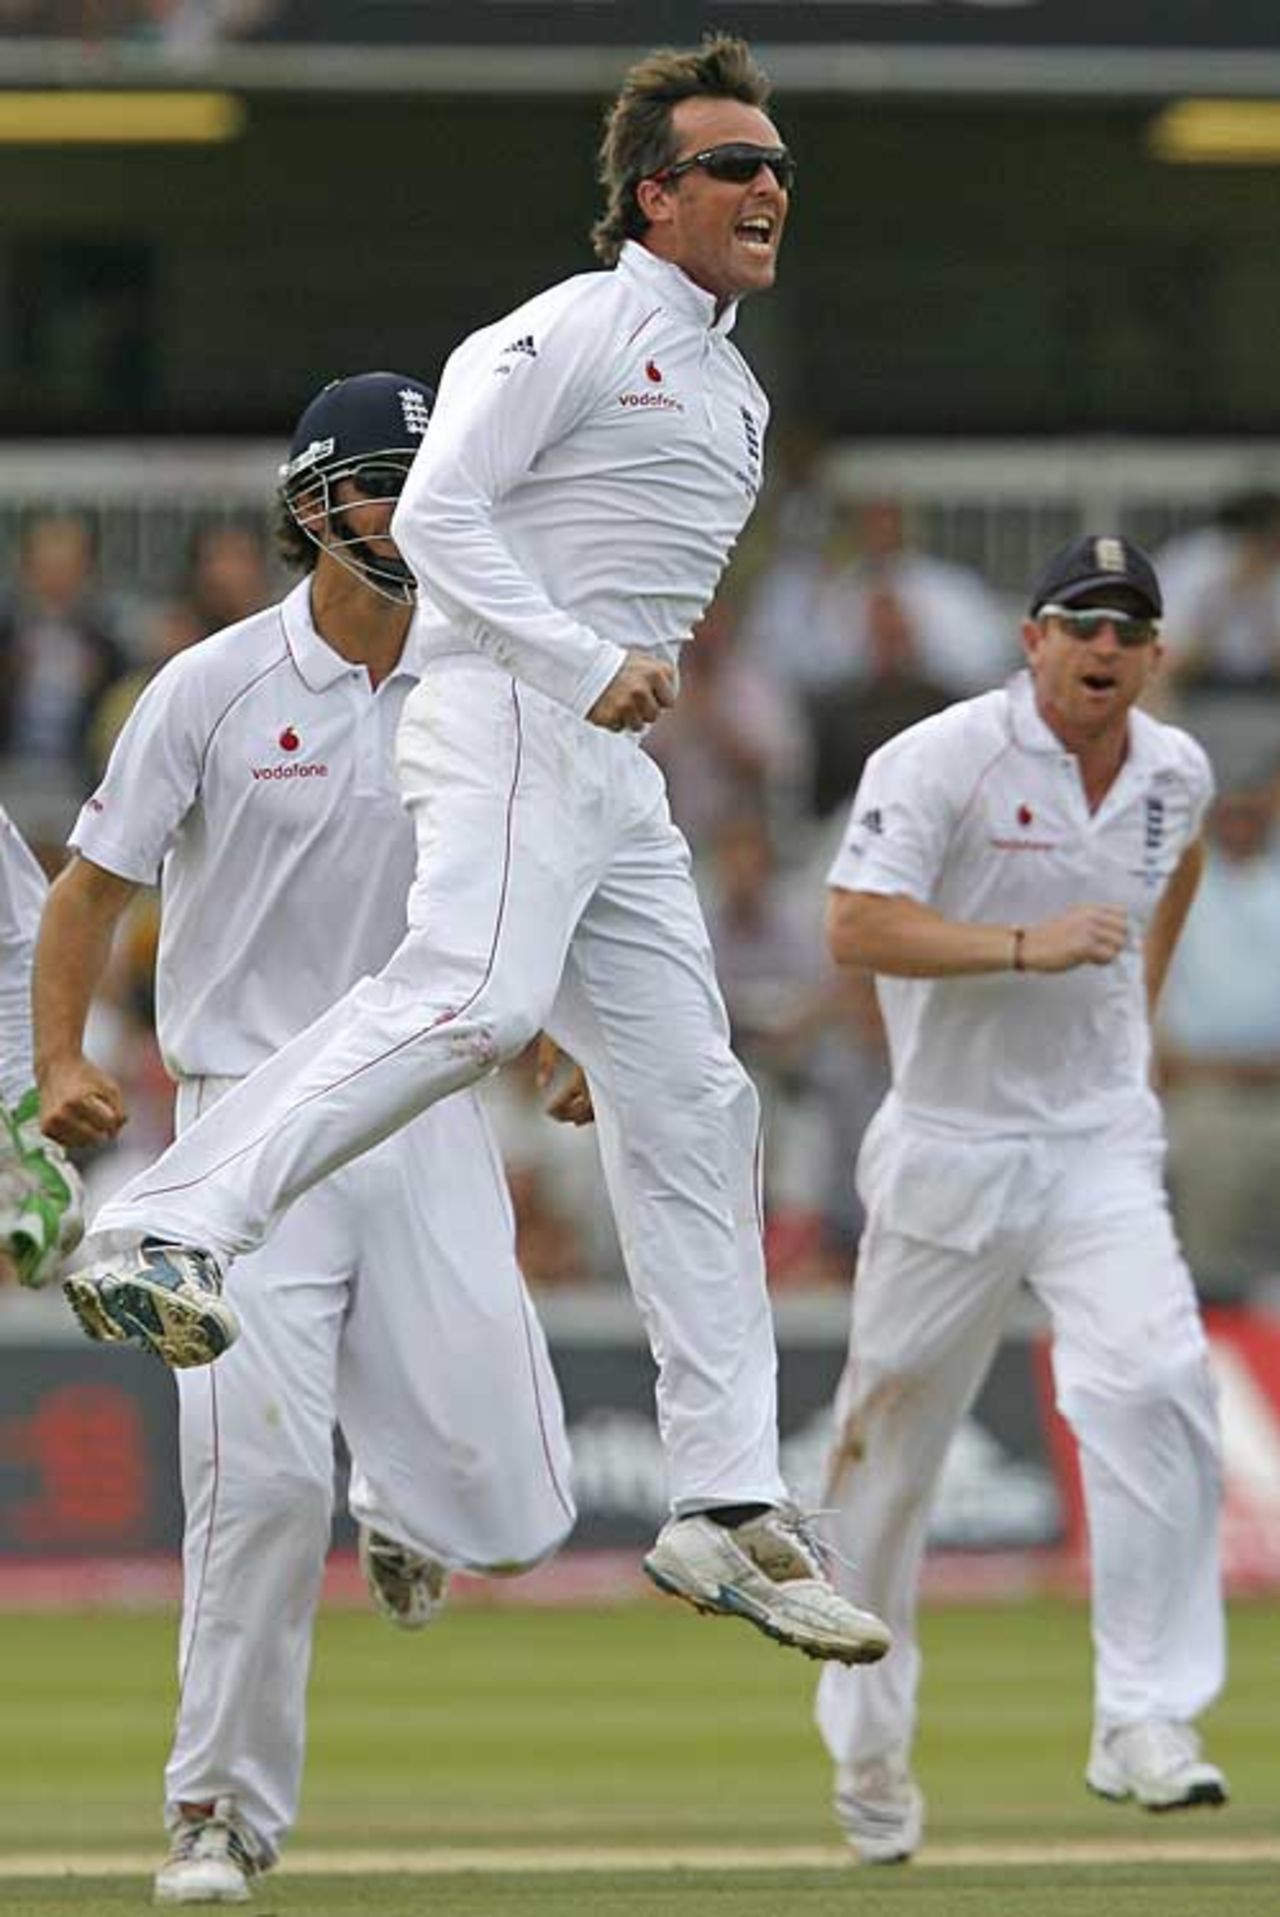 Graeme Swann celebrates after removing Michael Clarke, England v Australia, 2nd Test, Lord's, 5th day, July 20, 2009